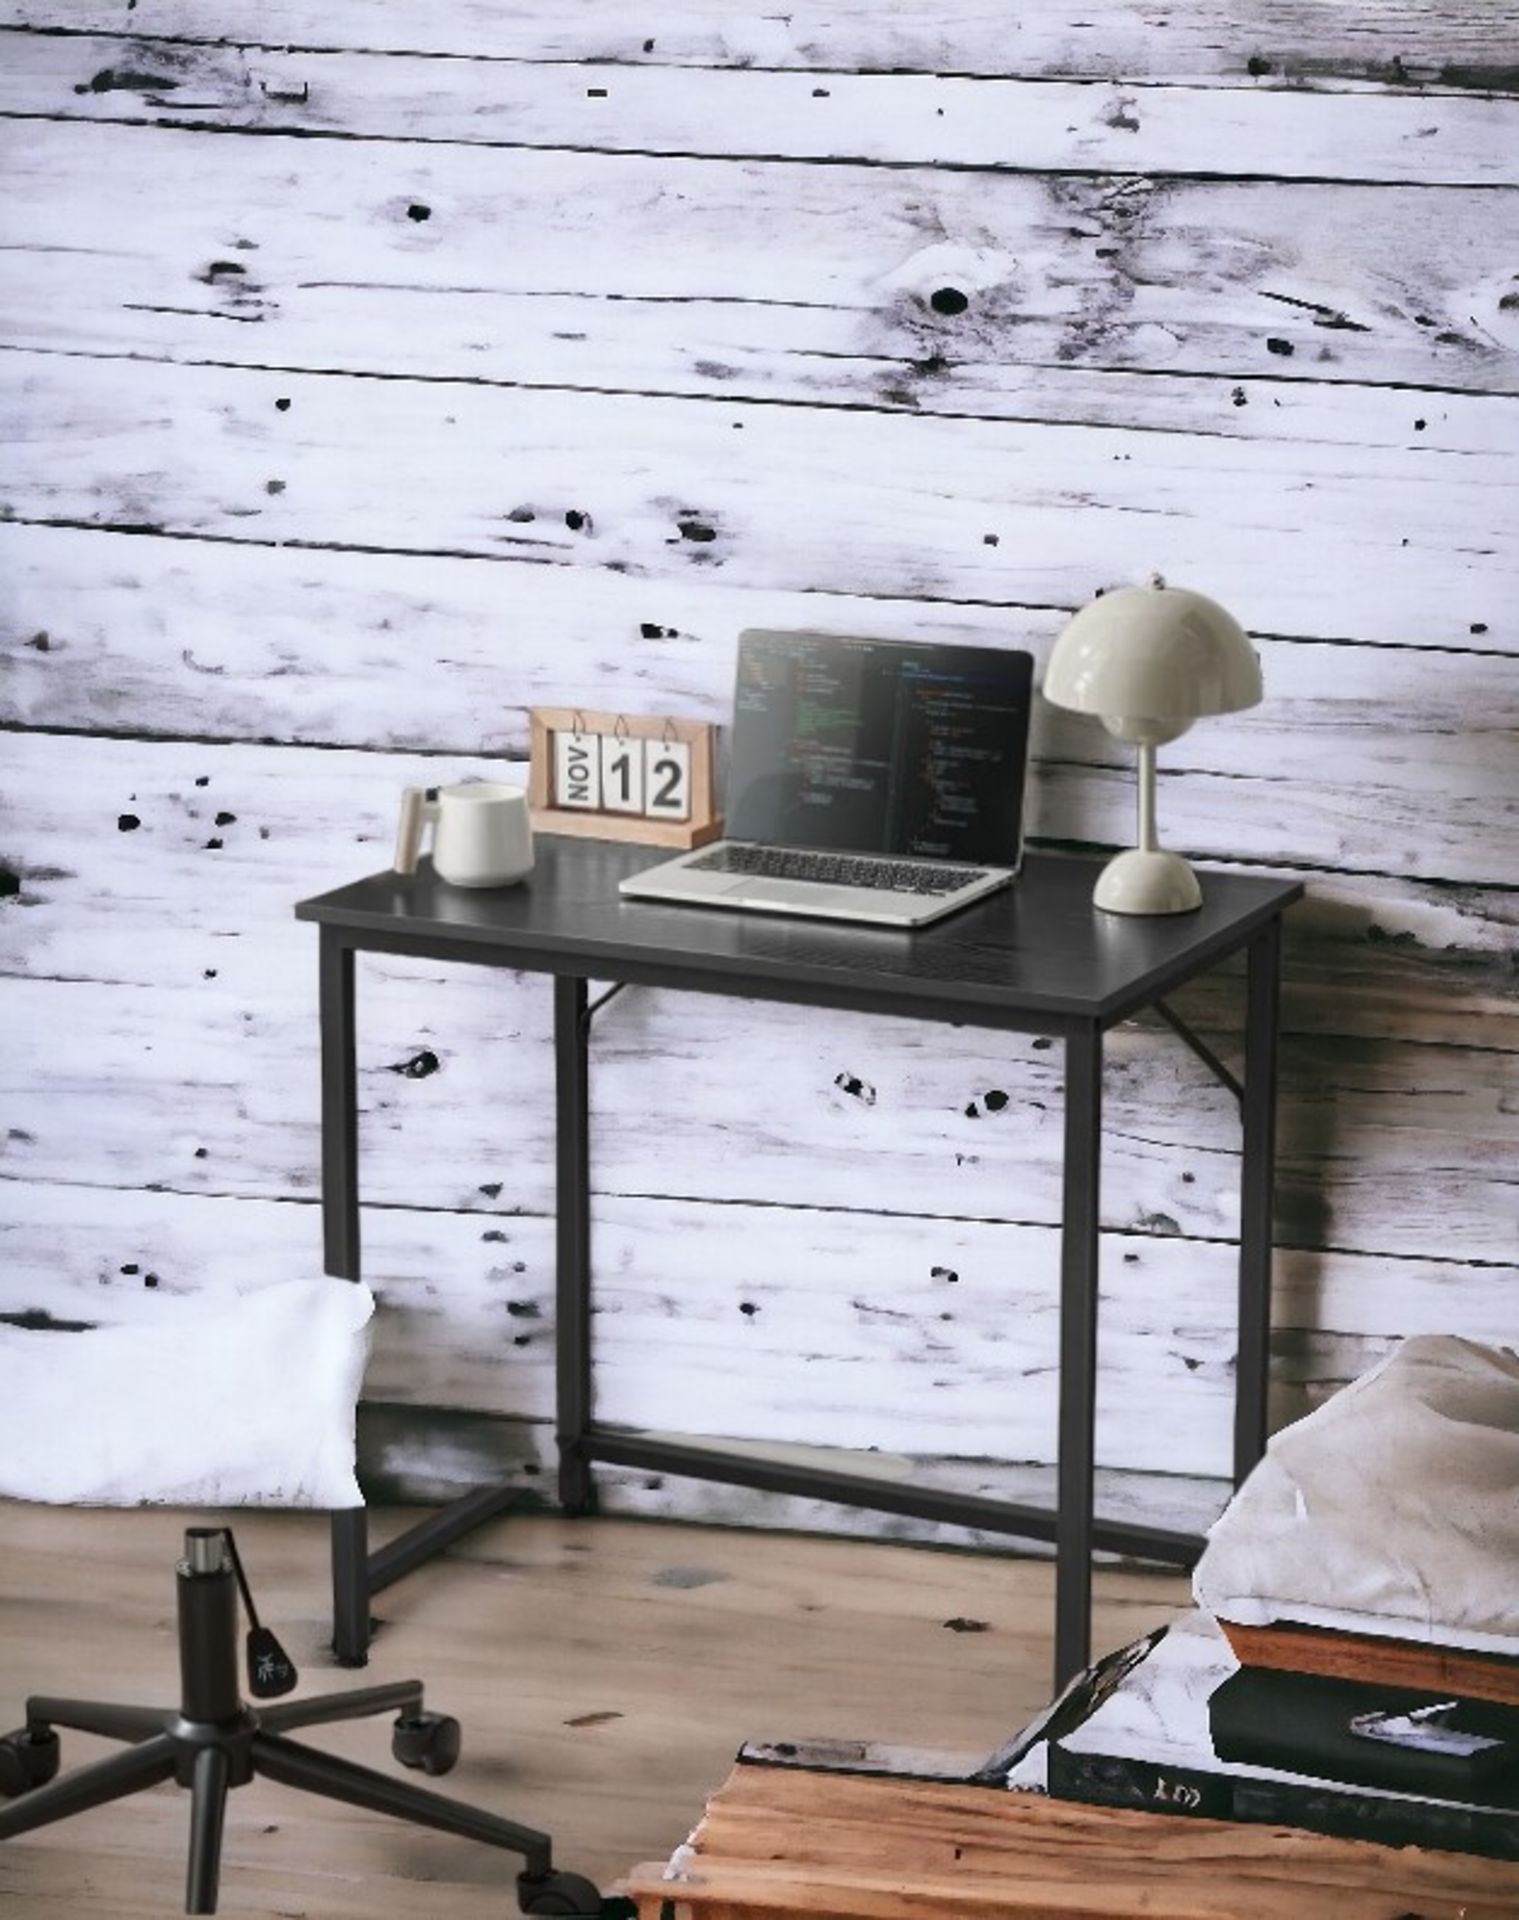 FREE DELIVERY - BRAND NEW COMPUTER DESK SMALL OFFICE WORKSTATION DESK INDUSTRIAL STYLE BLACK